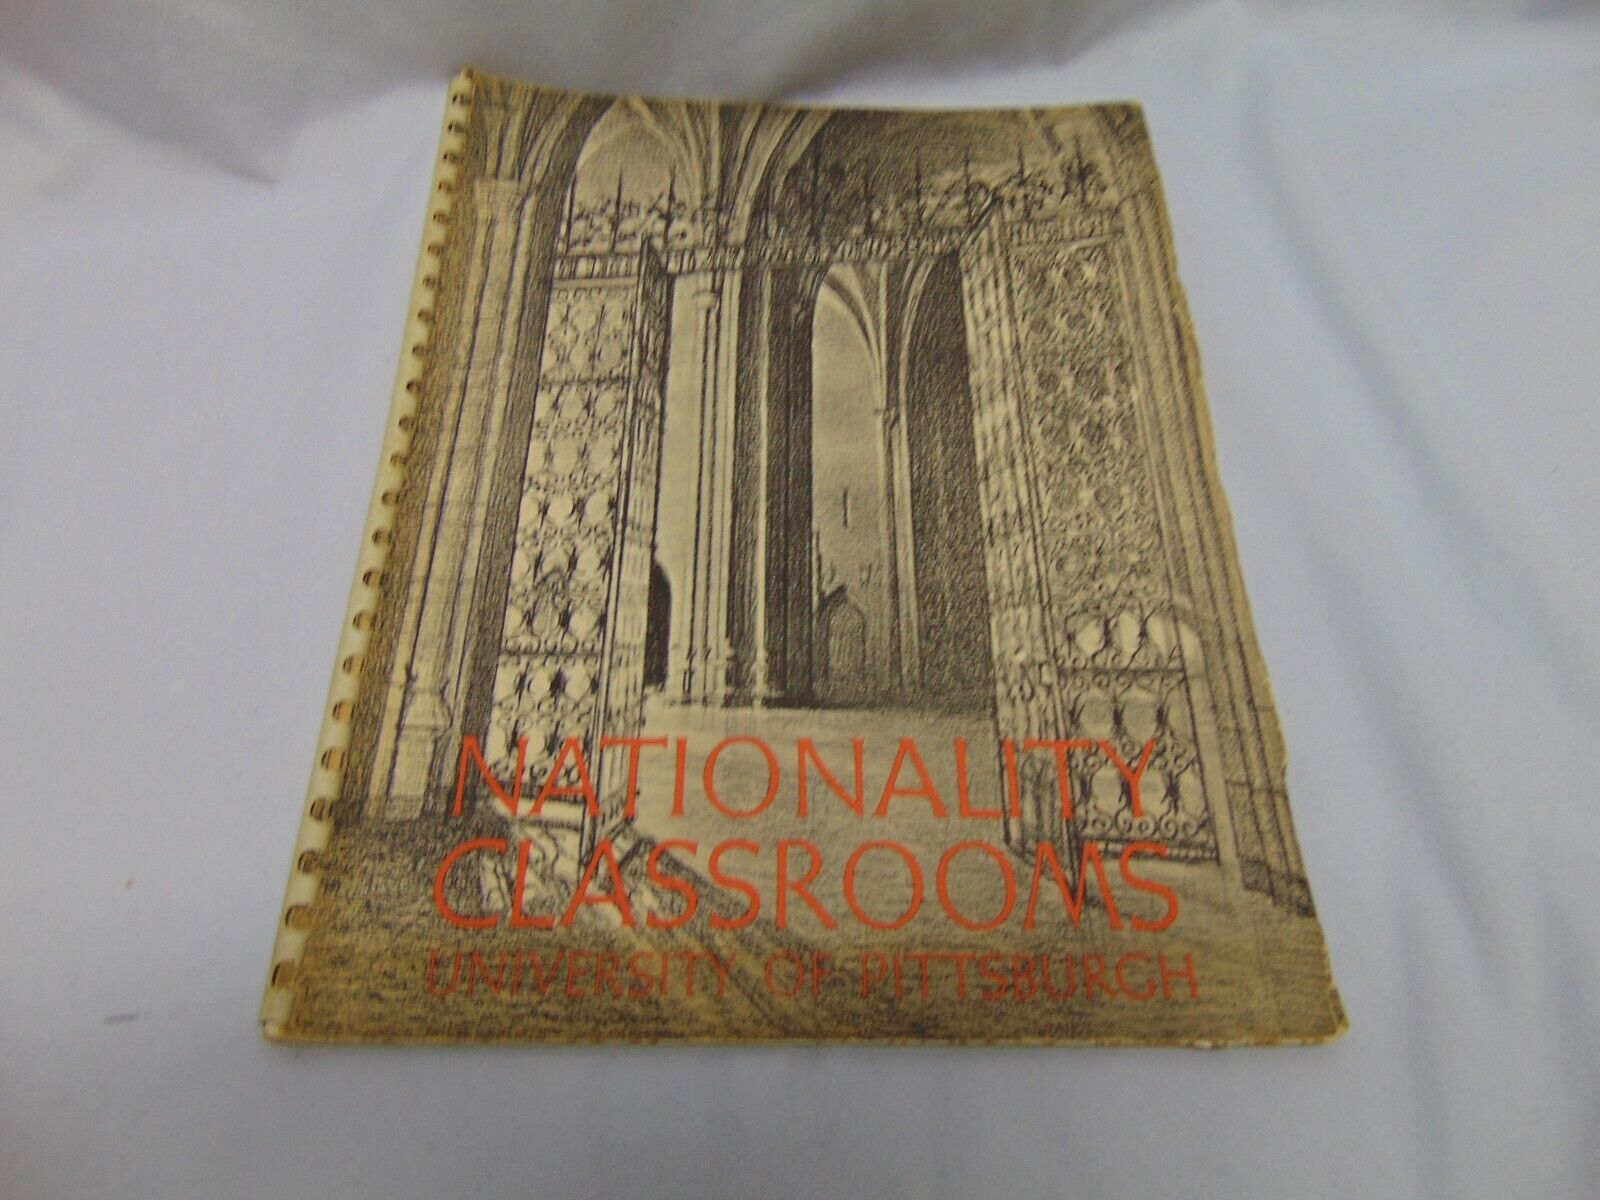 1955 Pittsburgh University Nationality classrooms book spiral bound 40 pgs 12\